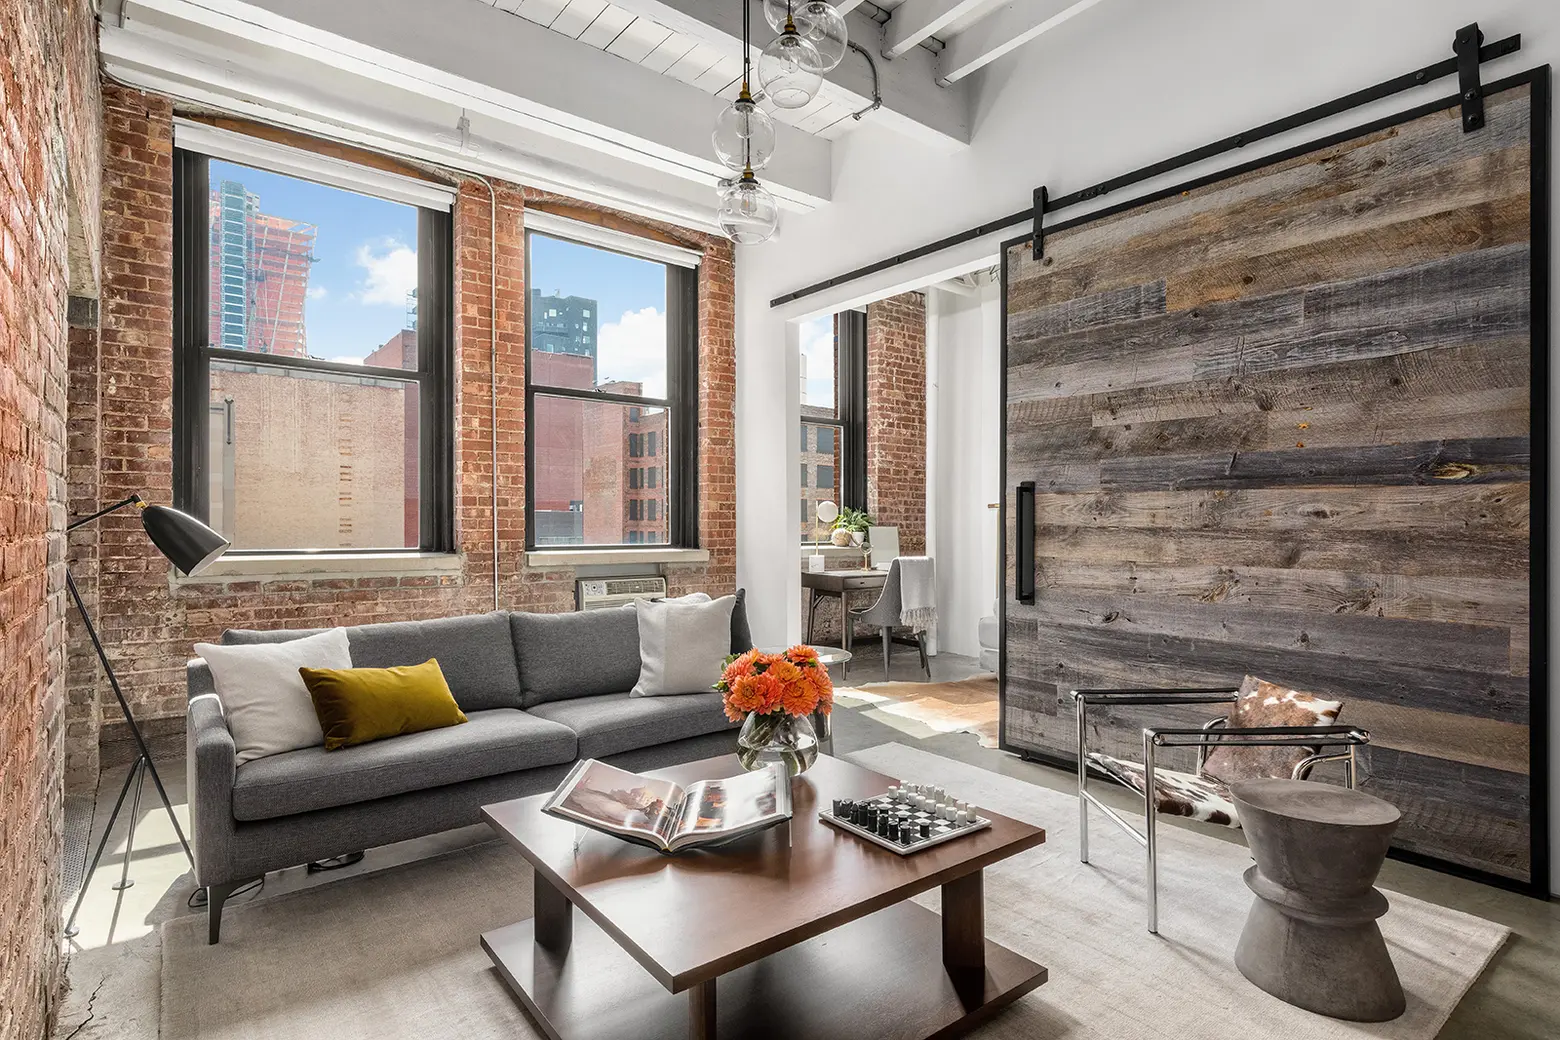 CNBC anchor Sara Eisen lists renovated, polished-rustic Chelsea loft for $2.6M